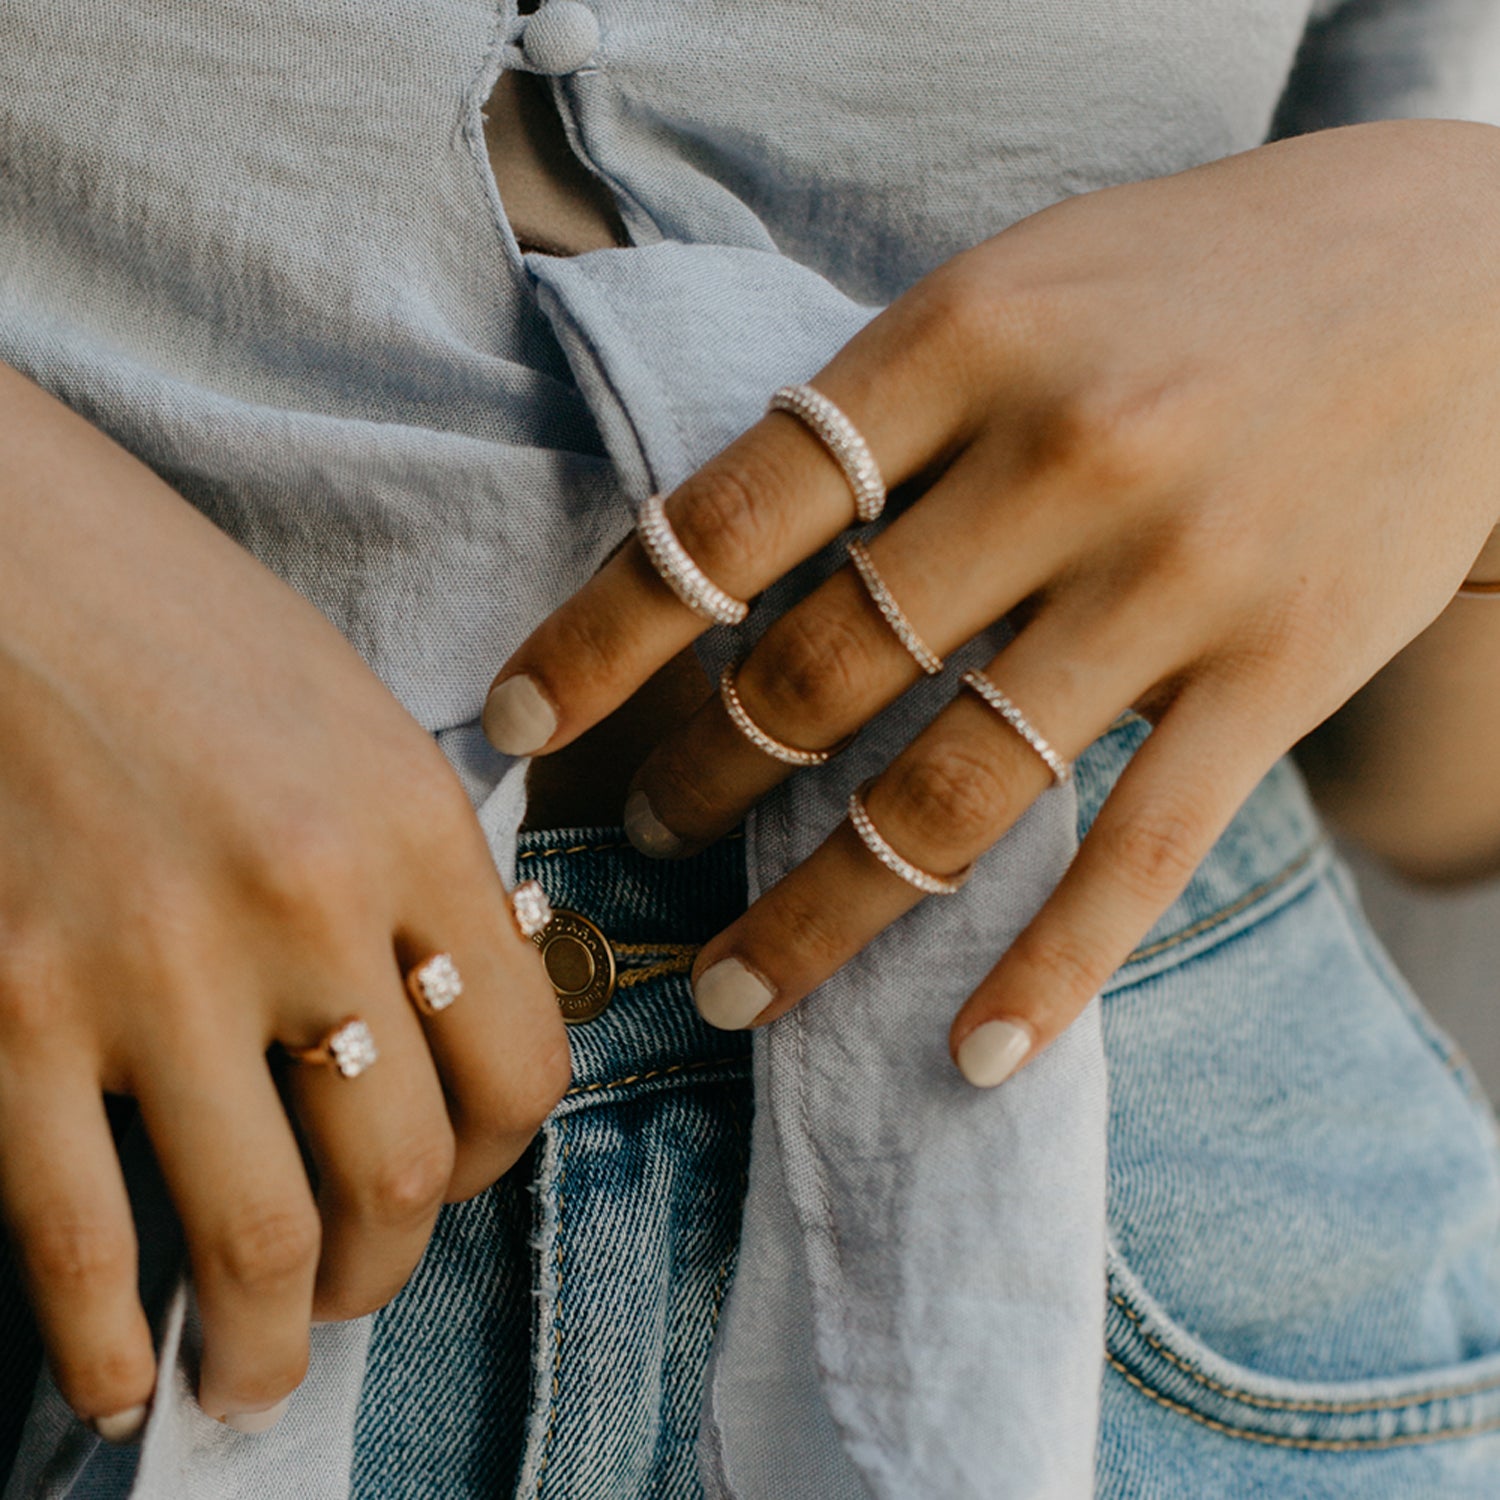 Two Olympia Rings shown with the Olympus Ring. On the other hand, the model is wearing the double finger Trilogy Ring.